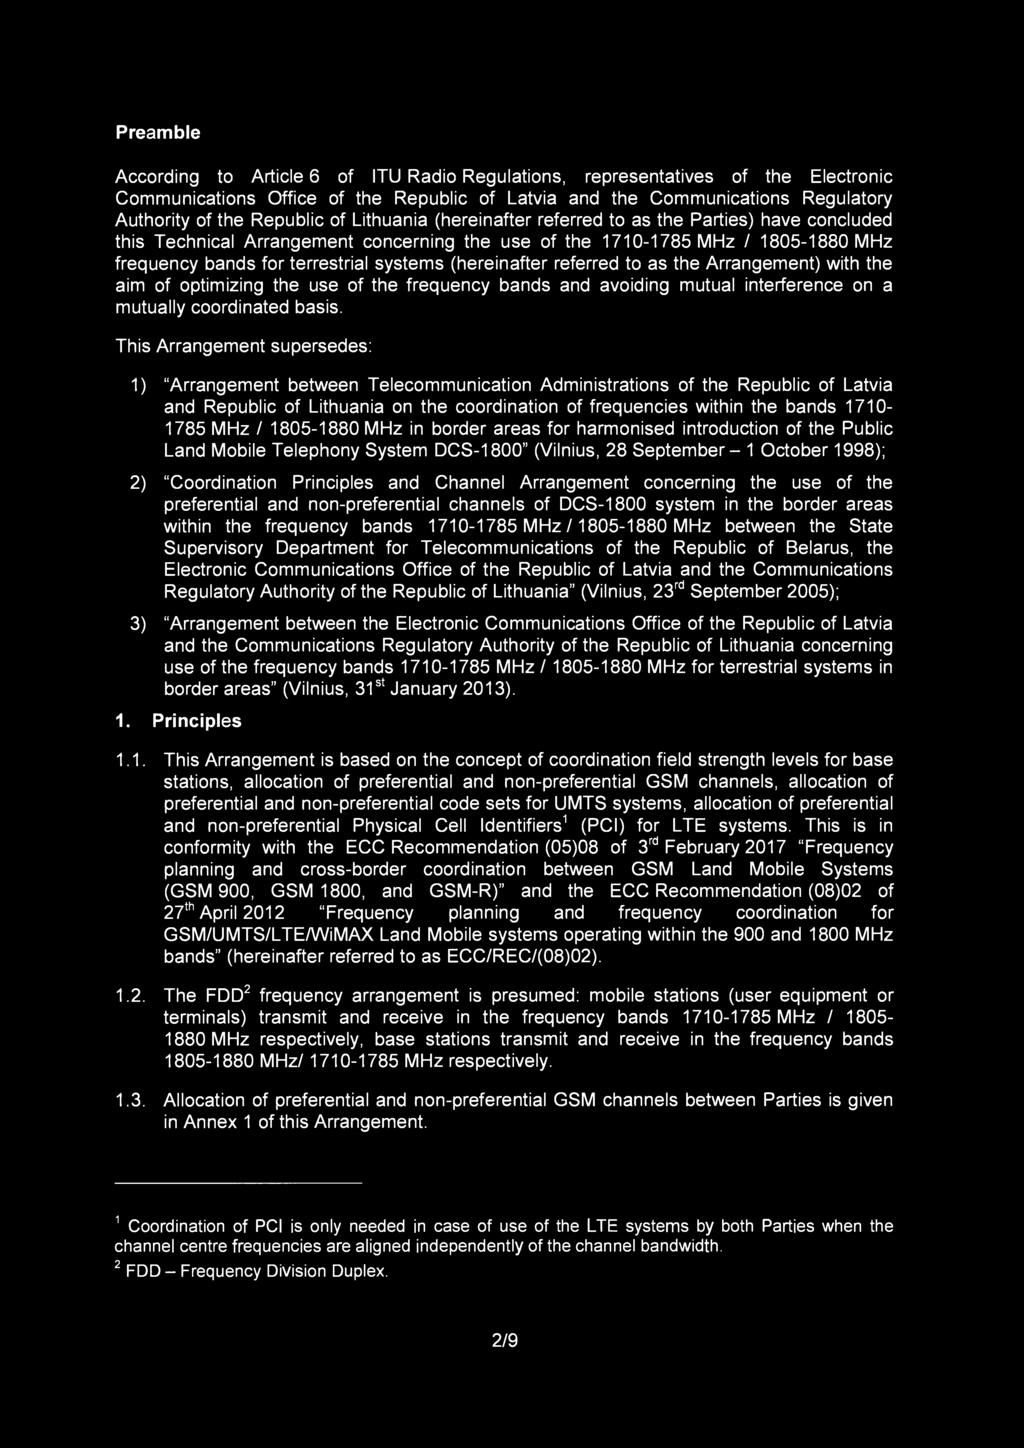 Preamble According to Article 6 of ITU Radio Regulations, representatives of the Electronic Communications Office of the Republic of Latvia and the Communications Regulatory Authority of the Republic